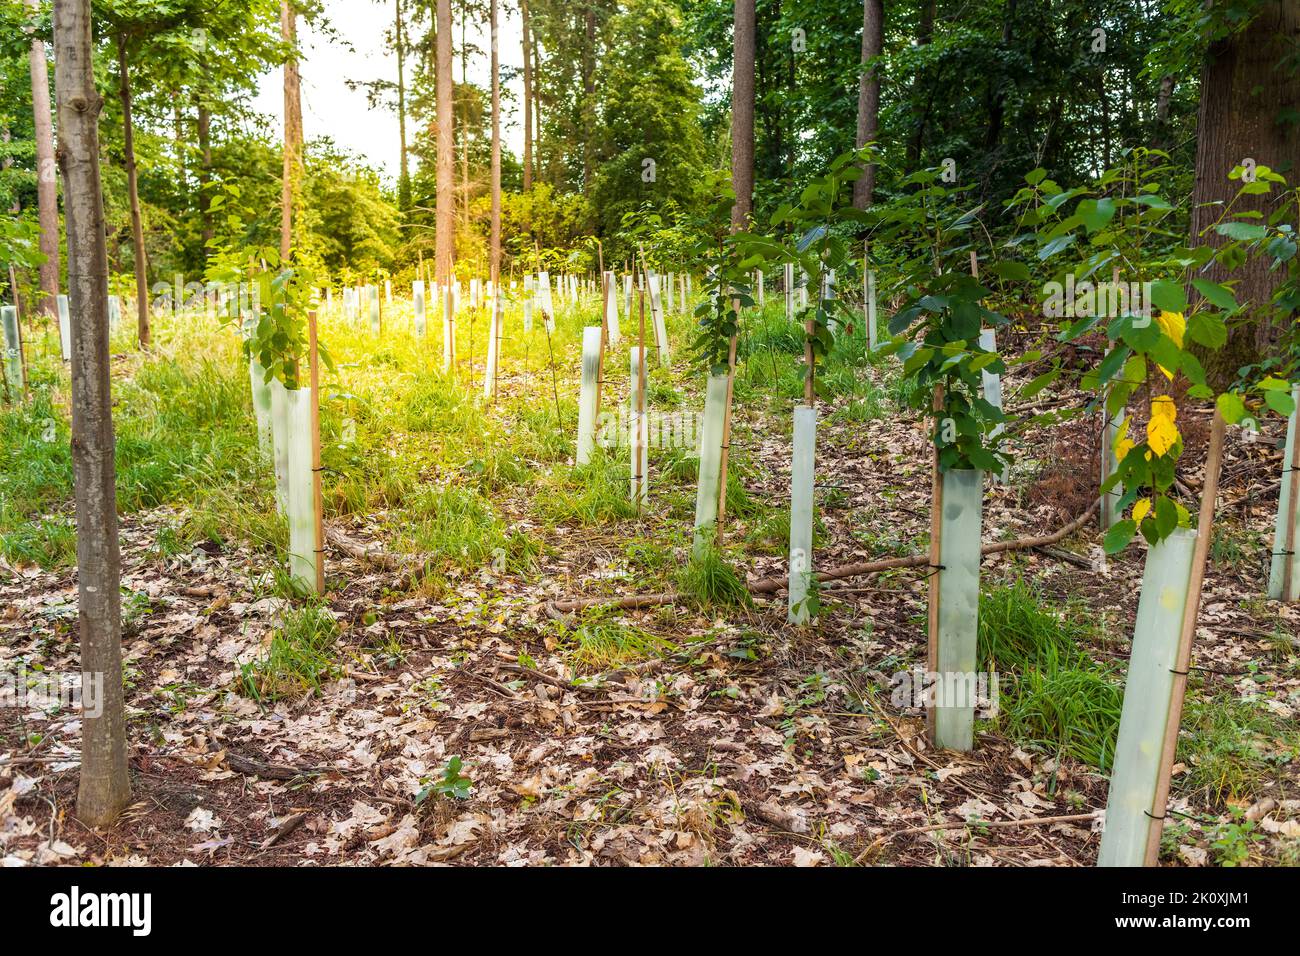 Forest tree nursery - Growing seedlings of coniferous and deciduous trees Stock Photo